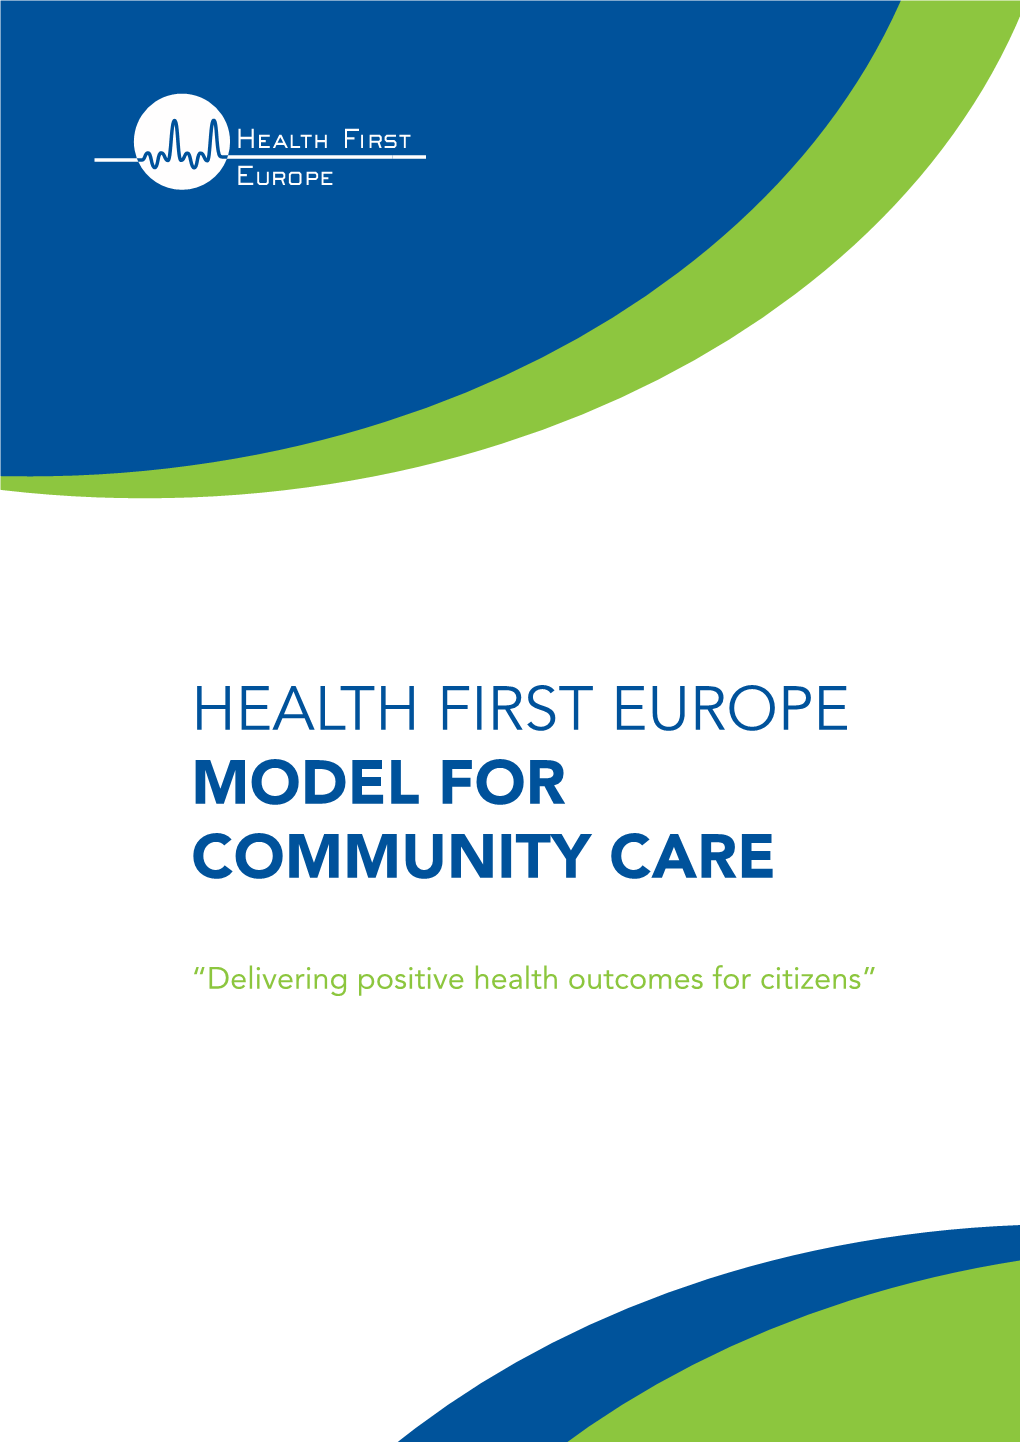 Health First Europe Model for Community Care Is a Road Map of the Substantive Changes Required to Release the Value and Power of the New Care Model